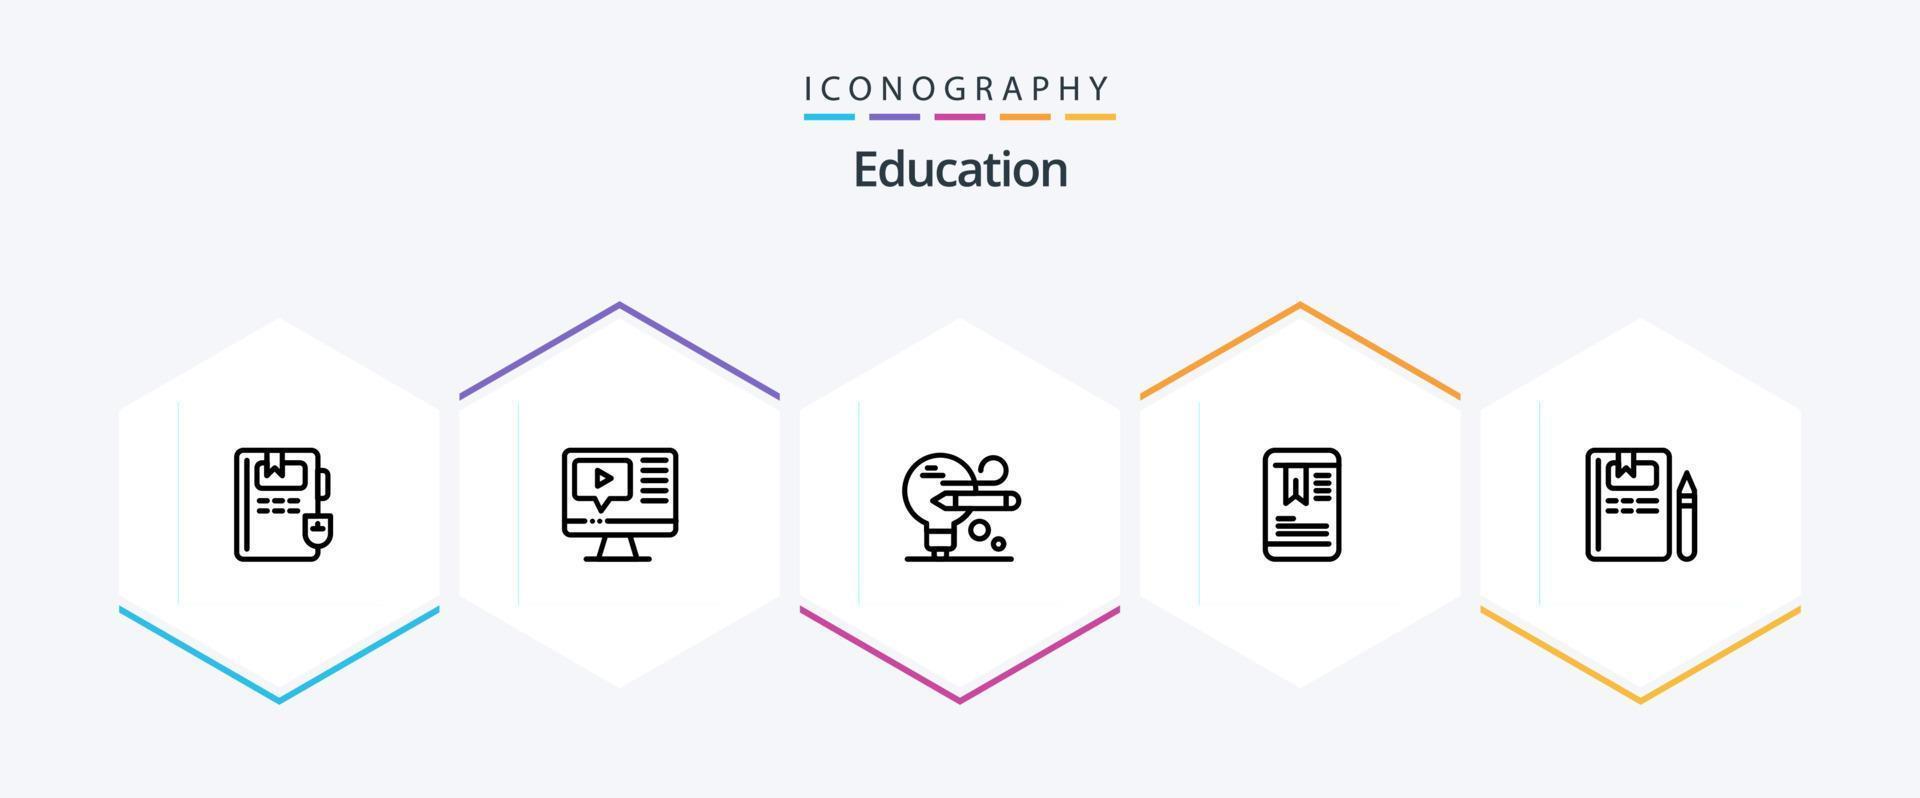 Education 25 Line icon pack including . knowledge. pencil. education. oneducation vector